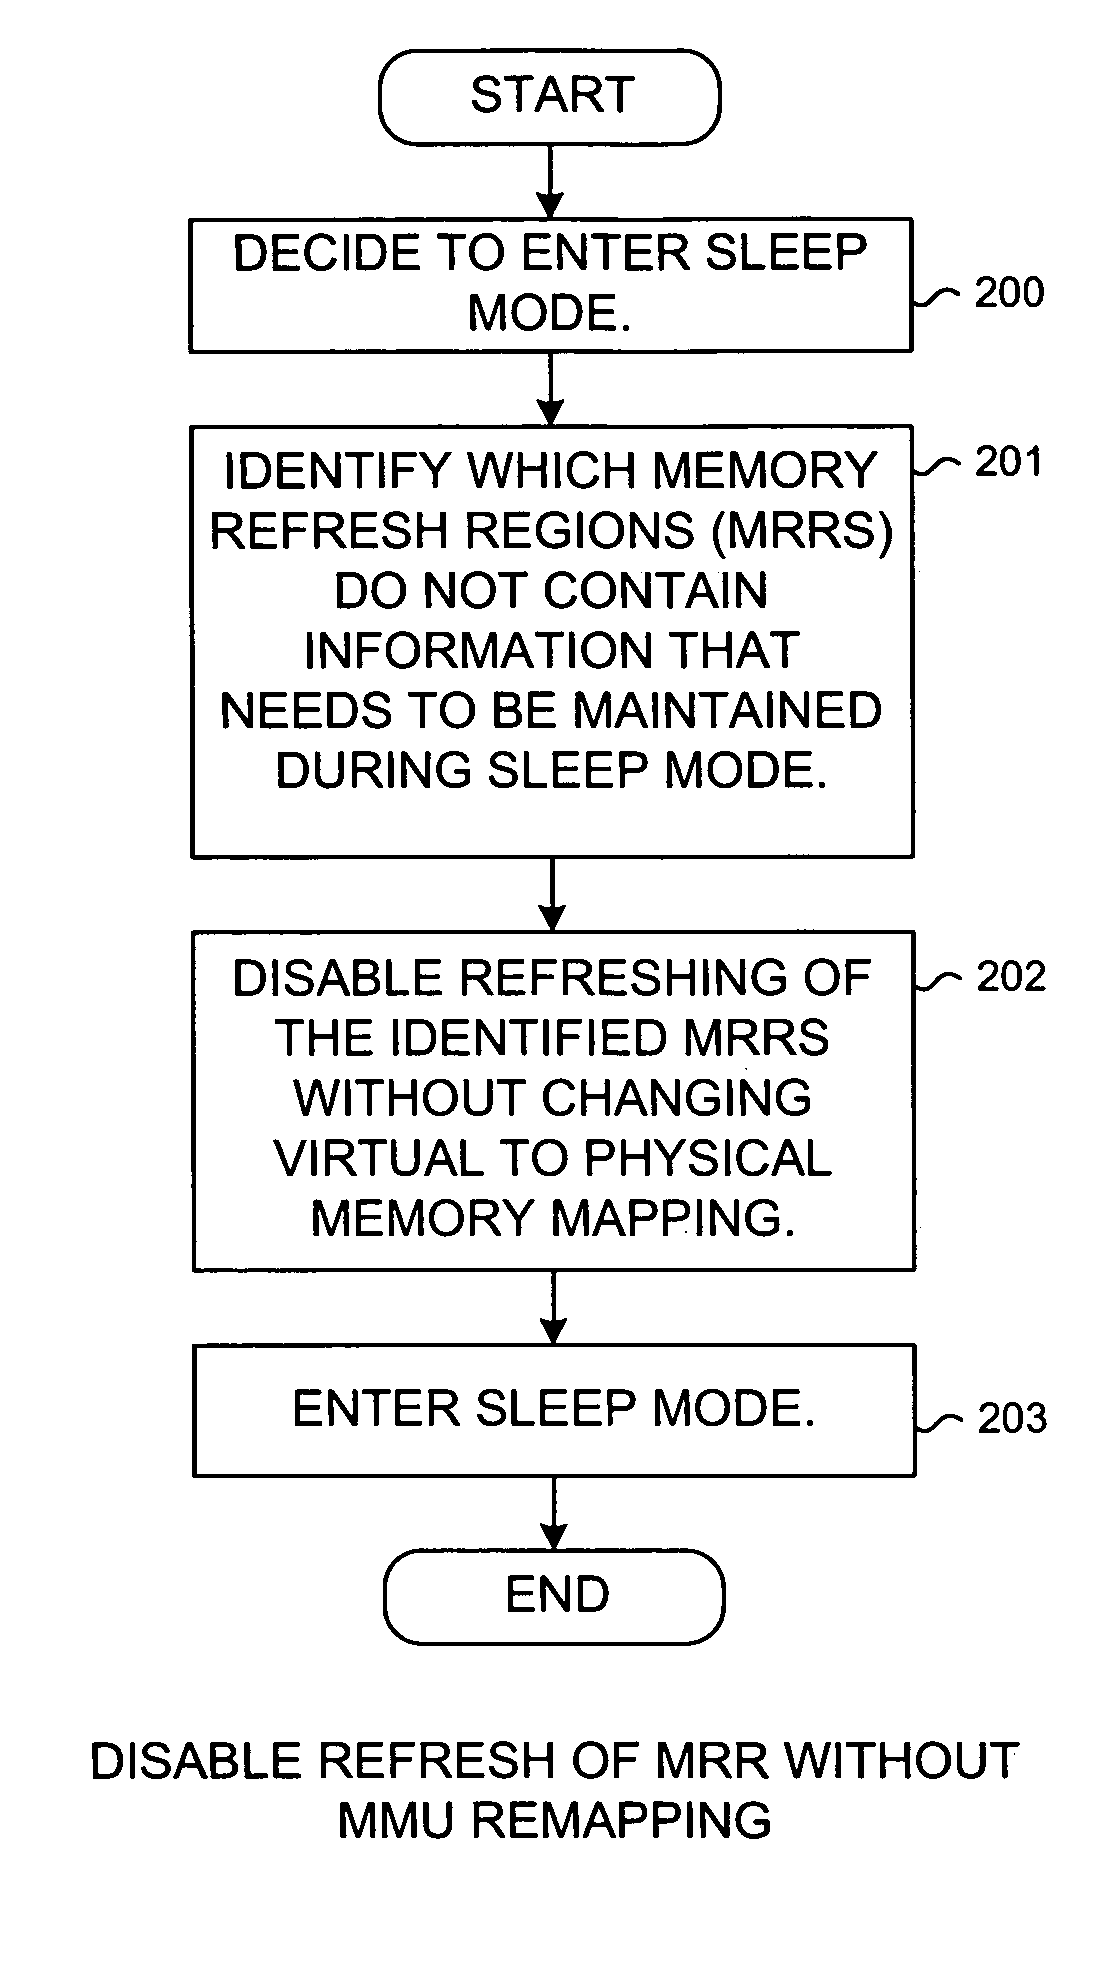 Reducing power consumption by disabling refresh of unused portions of DRAM during periods of device inactivity